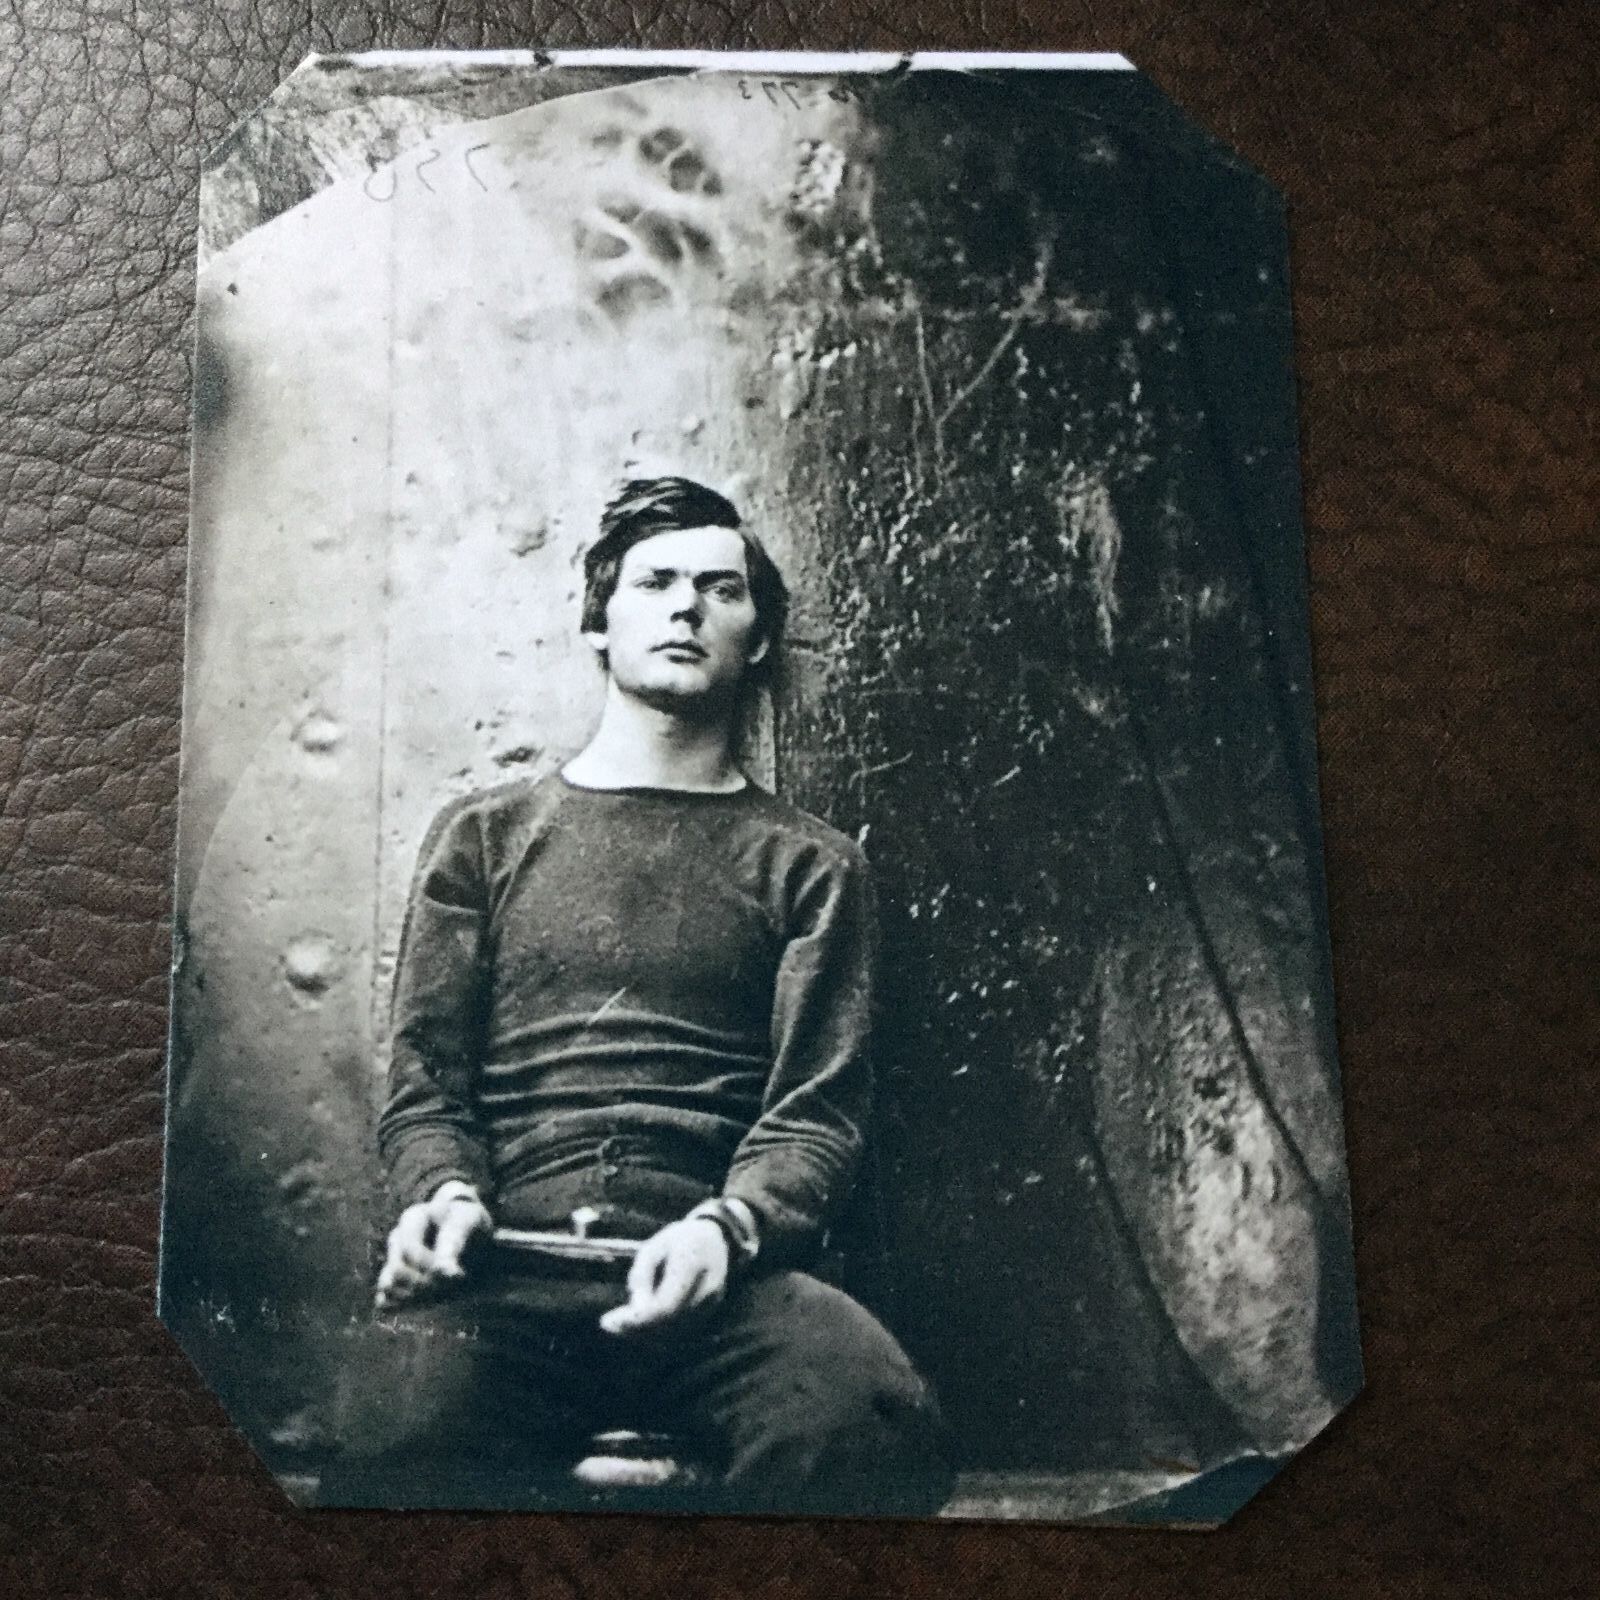 LEWIS POWELL 1 OF 4 PEOPLE HANGED FOR THE LINCOLN ASSASSINATION TinType C754RP